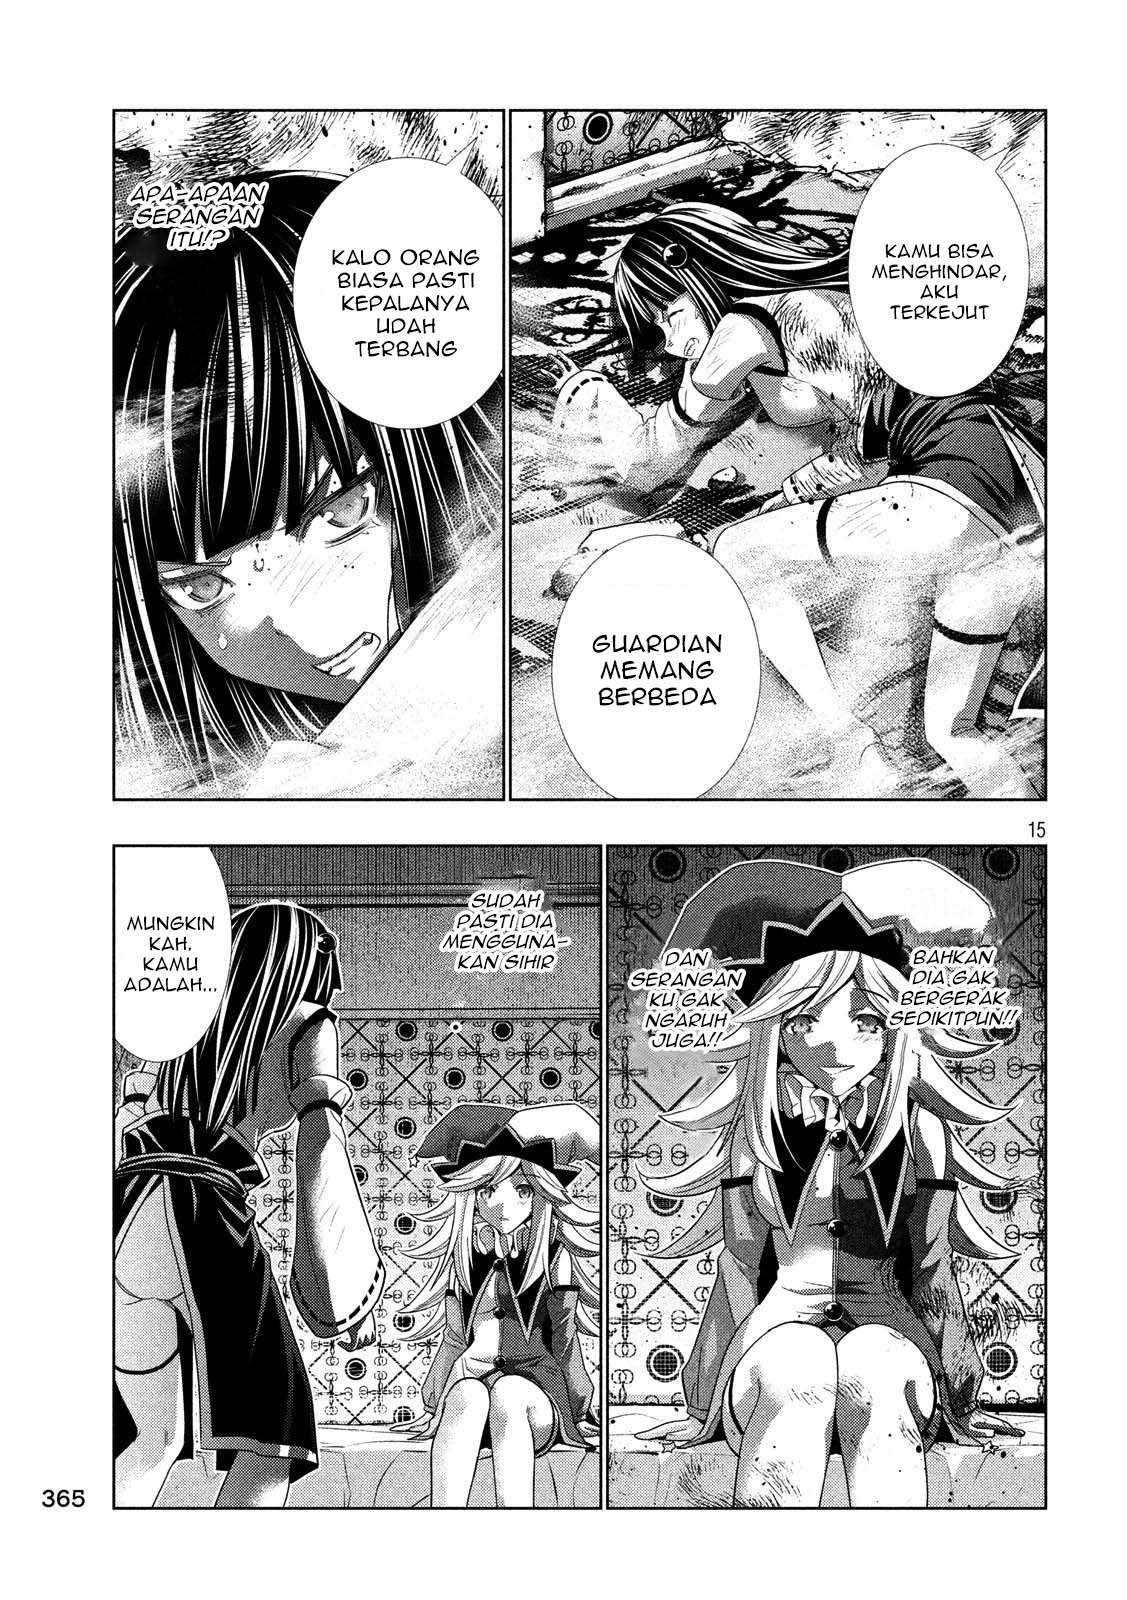 Parallel Paradise Chapter 081 Bahasa Indonesia